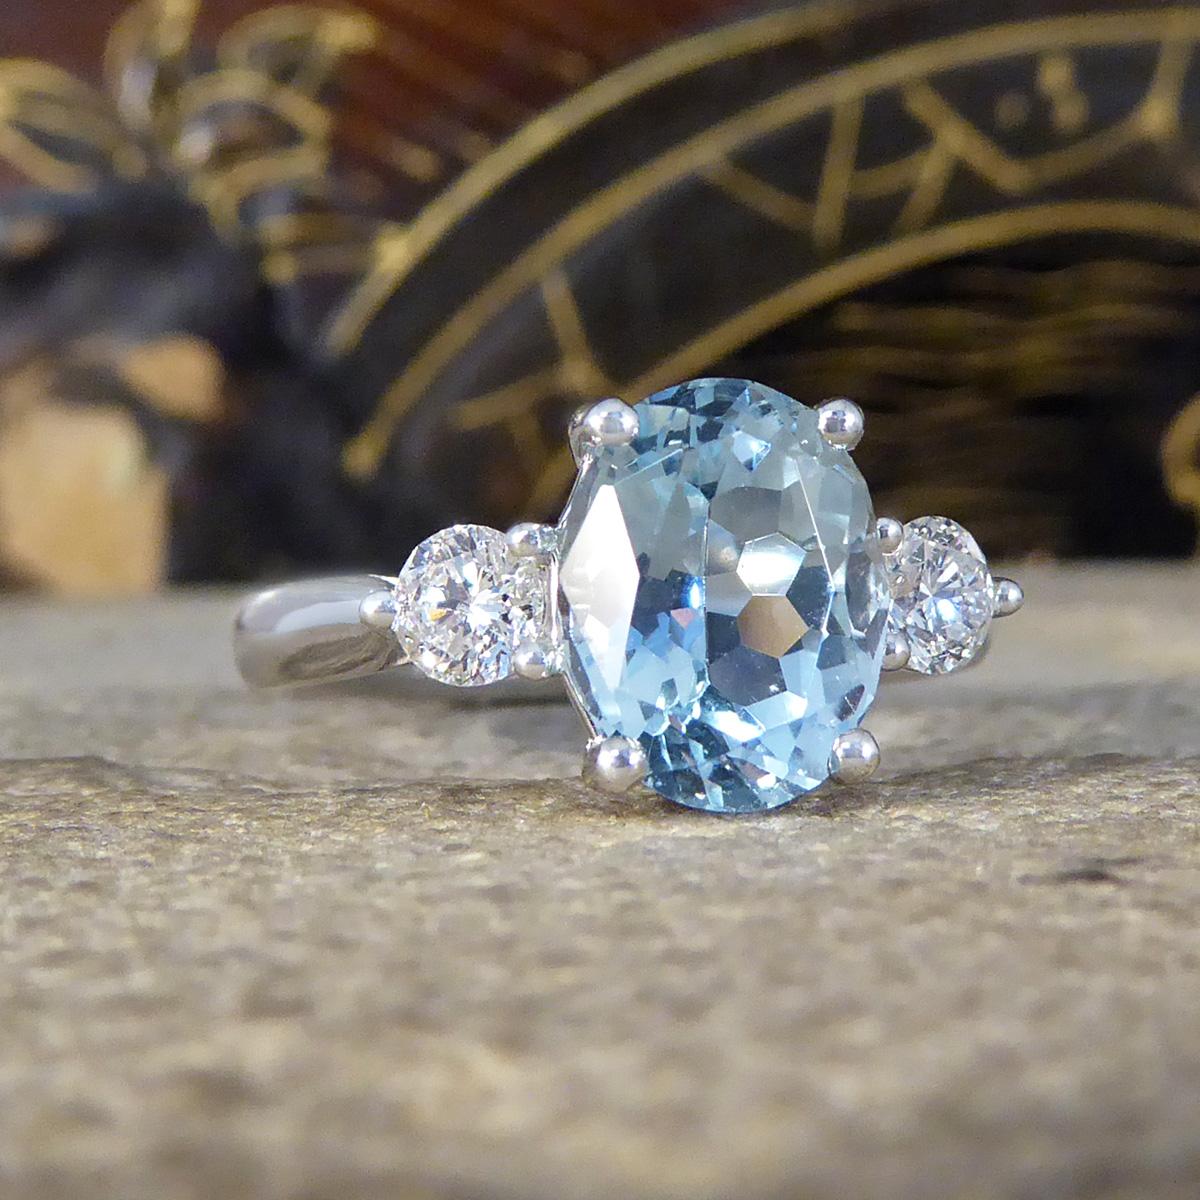 An absolutely gorgeous and sparkly Aquamarine and Diamond three stone ring that holds three beautiful stones set in secure claw settings. In the centre sits a lovely bright Oval Cut Aquamarine with a light blue colour to it weighing 1.93ct with a